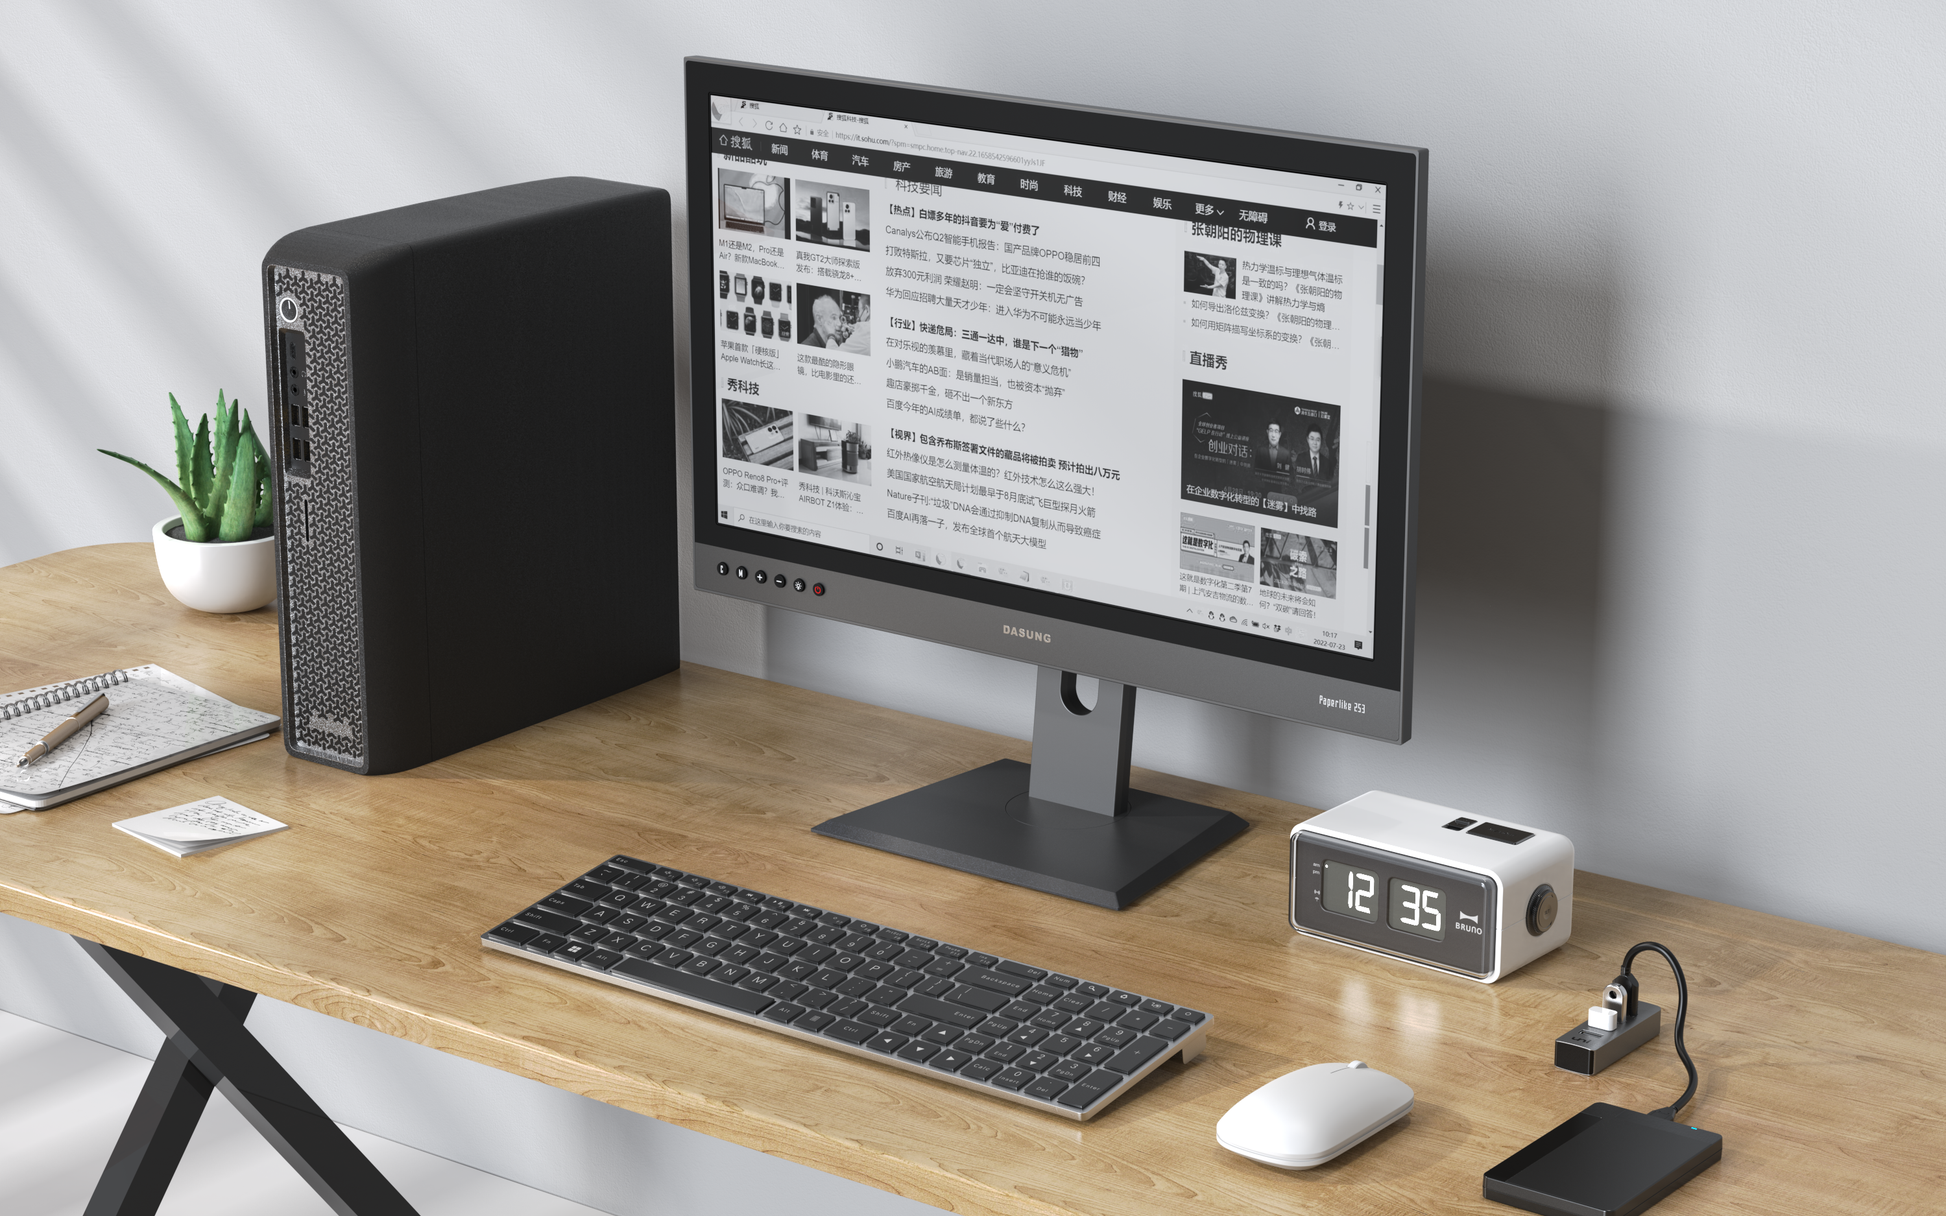 Onyx made a portable E-Ink monitor that can be yours for $800